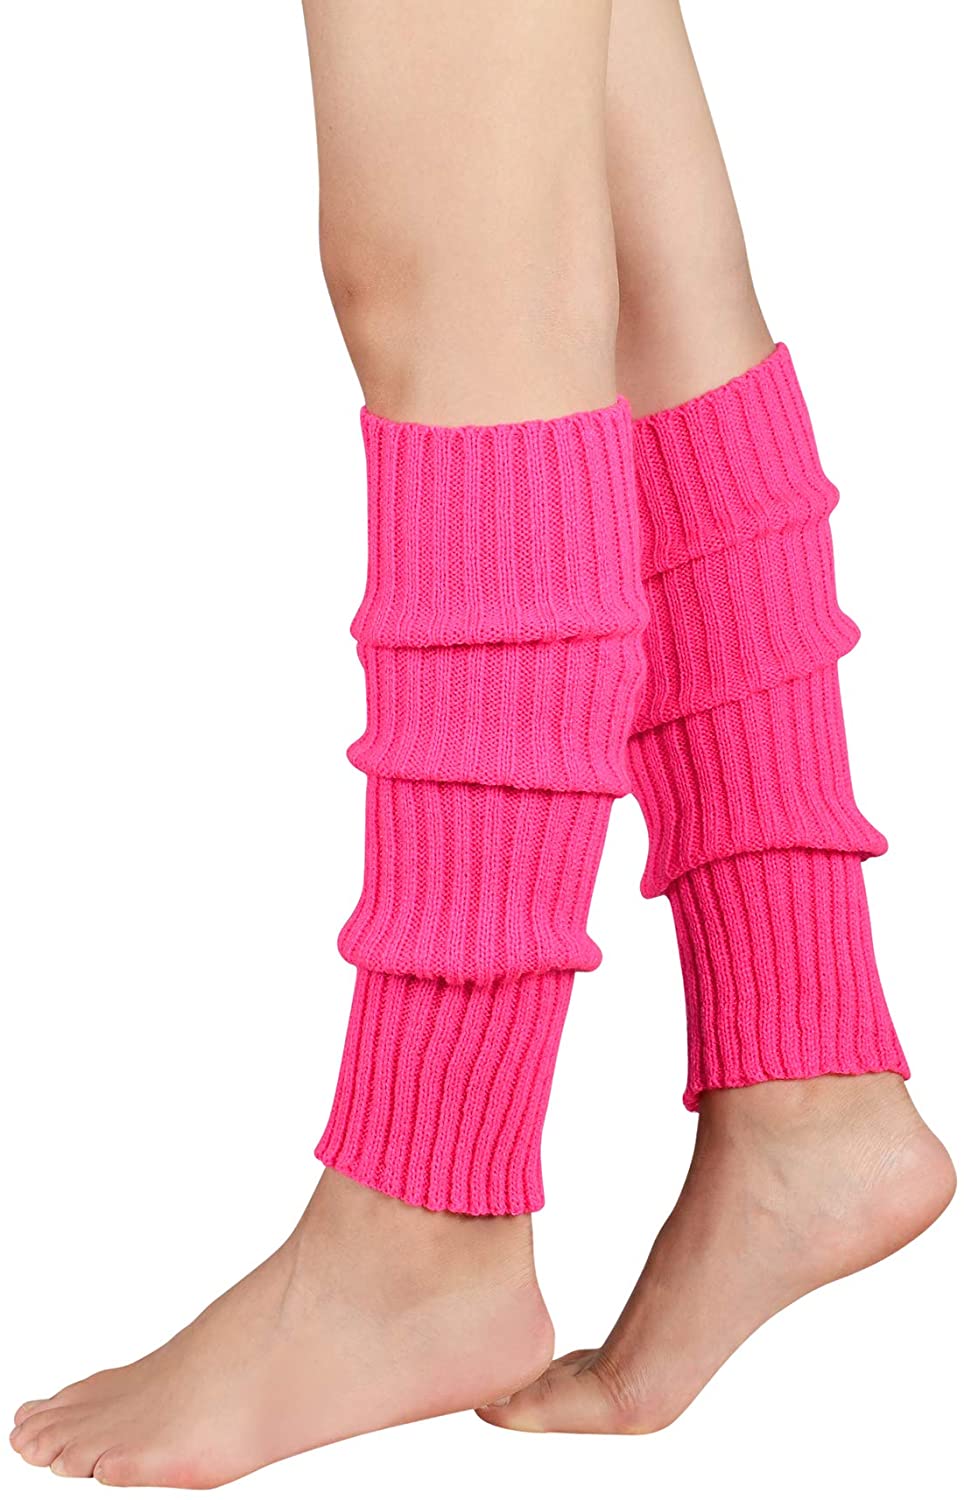 Brand New with Tags Knitted Glitter Womens Ladies Dance Gear Neon Leg Warmers 